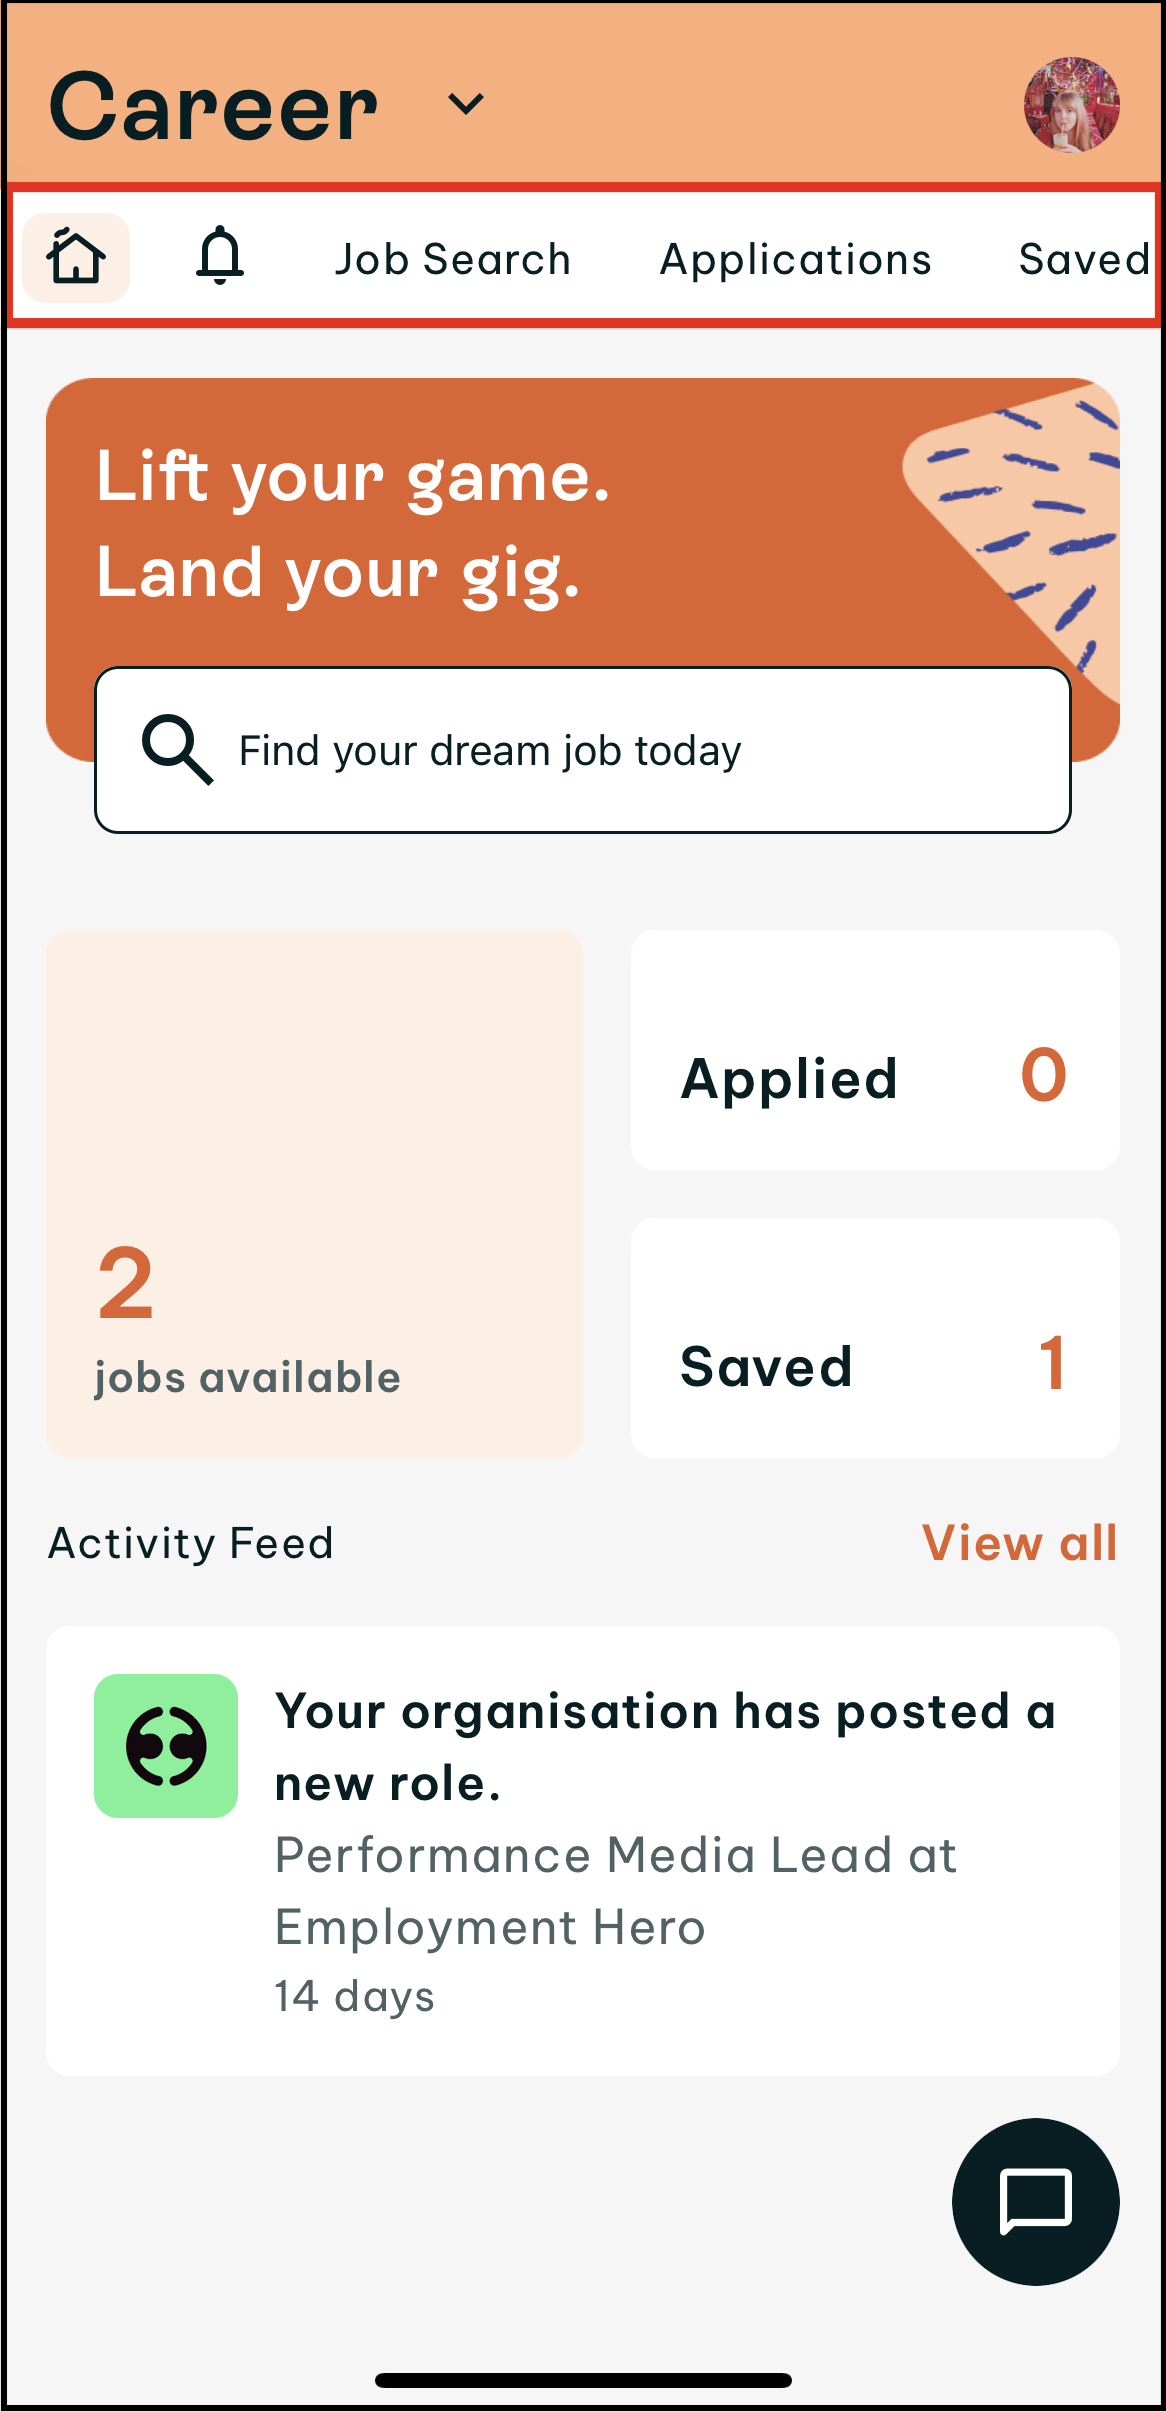 Screenshot of Career home screen in the Swag app, describing what action you can perform by tapping on the menu items along the top bar